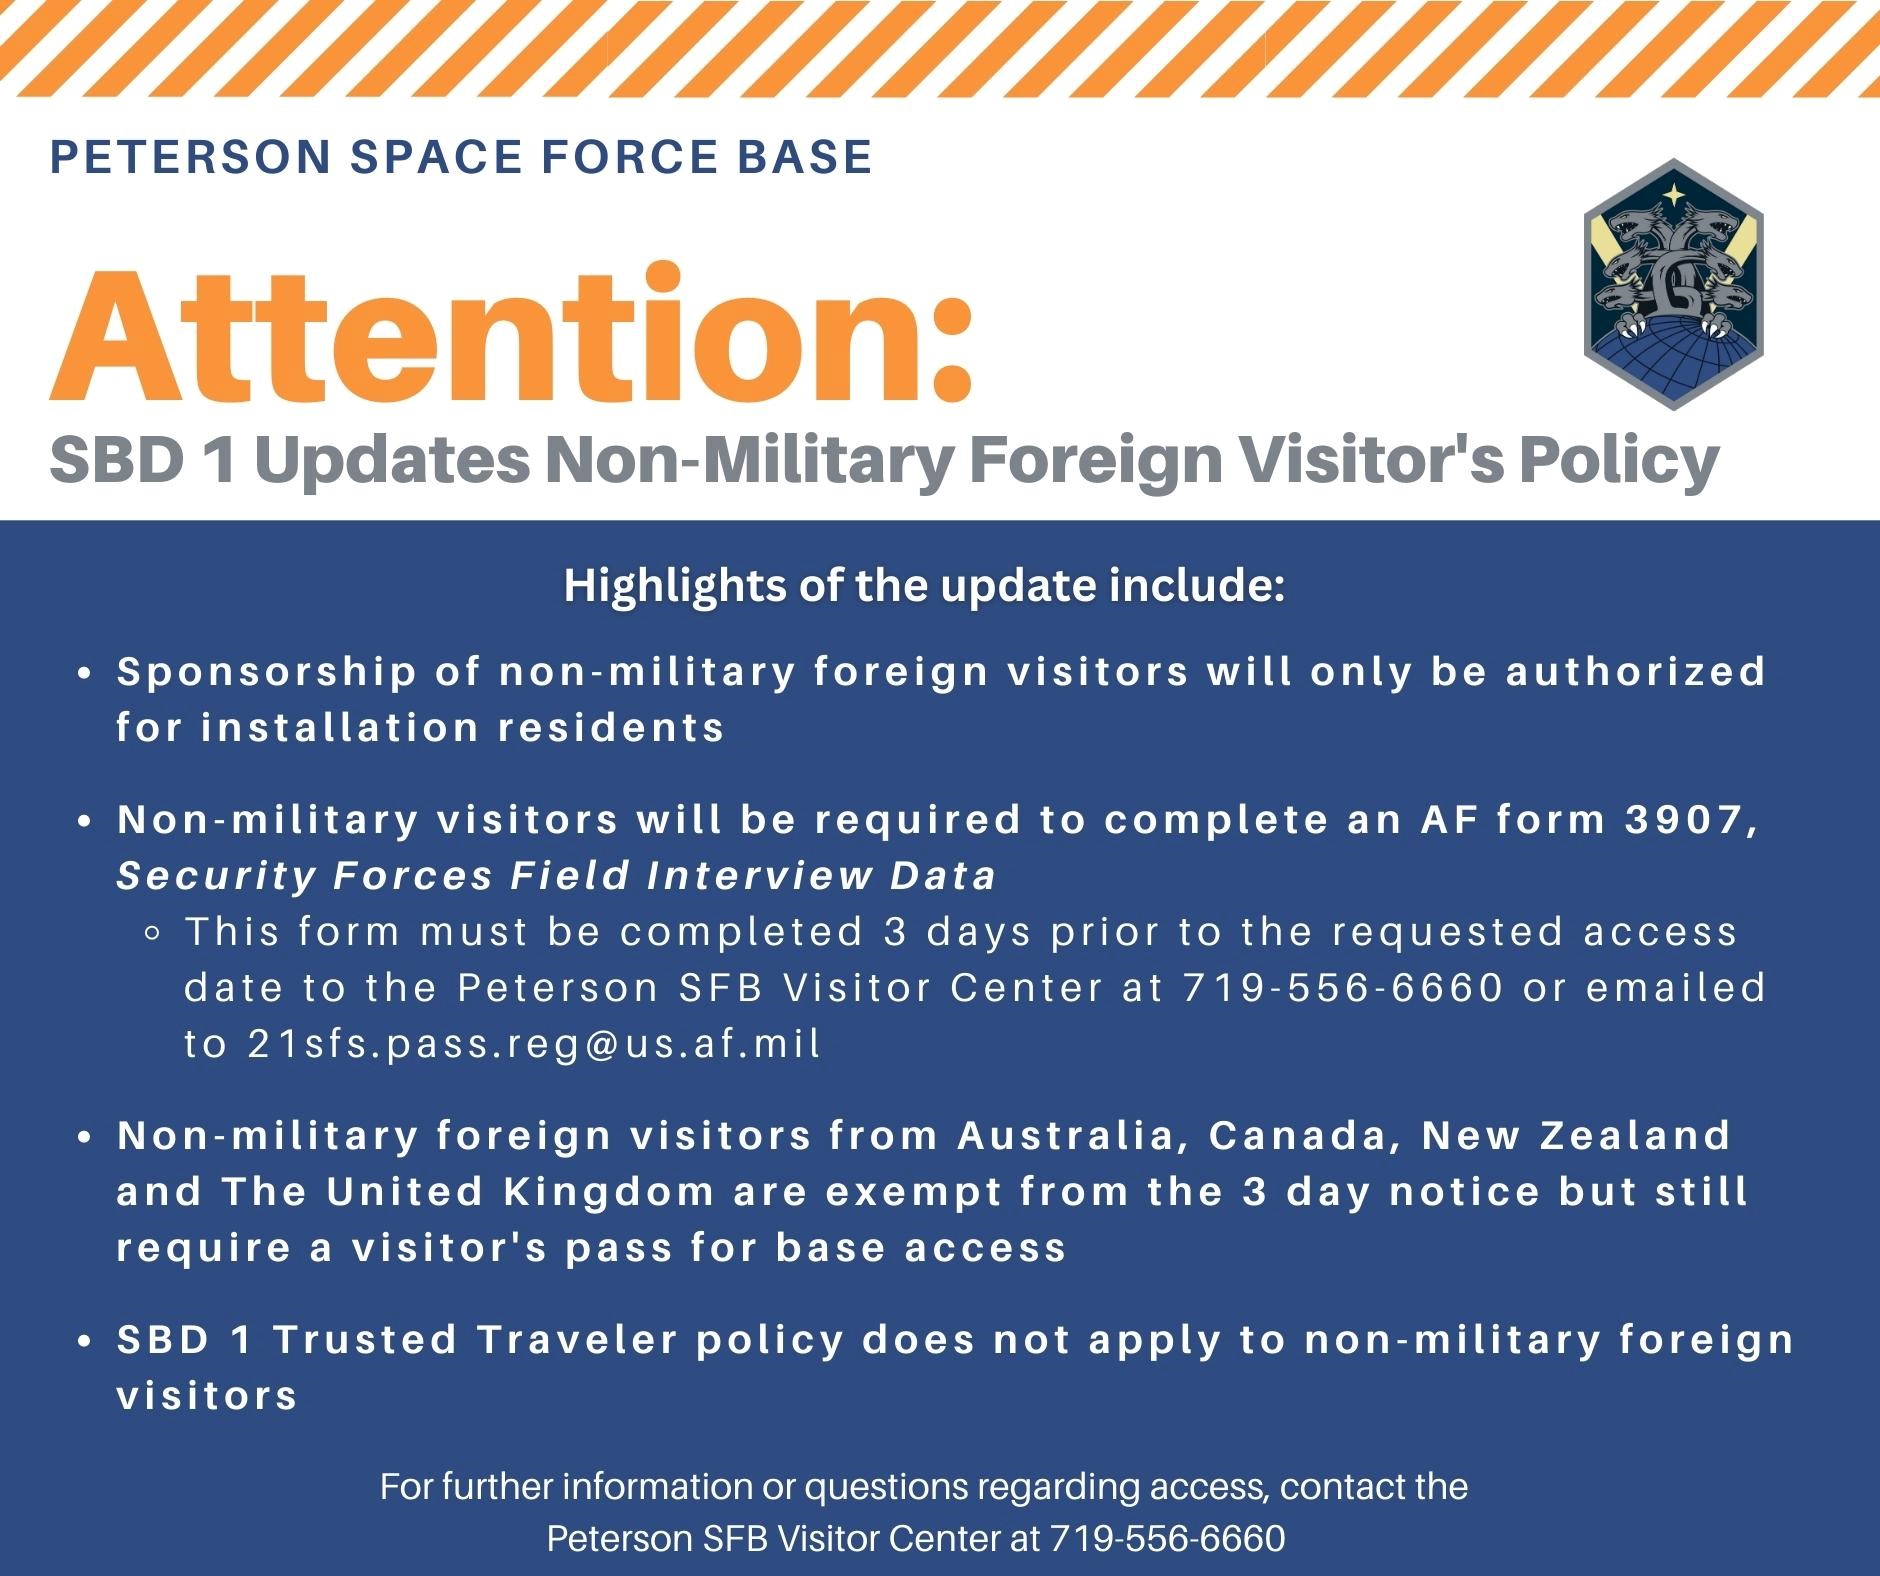 Non-military foreign visitor policy image